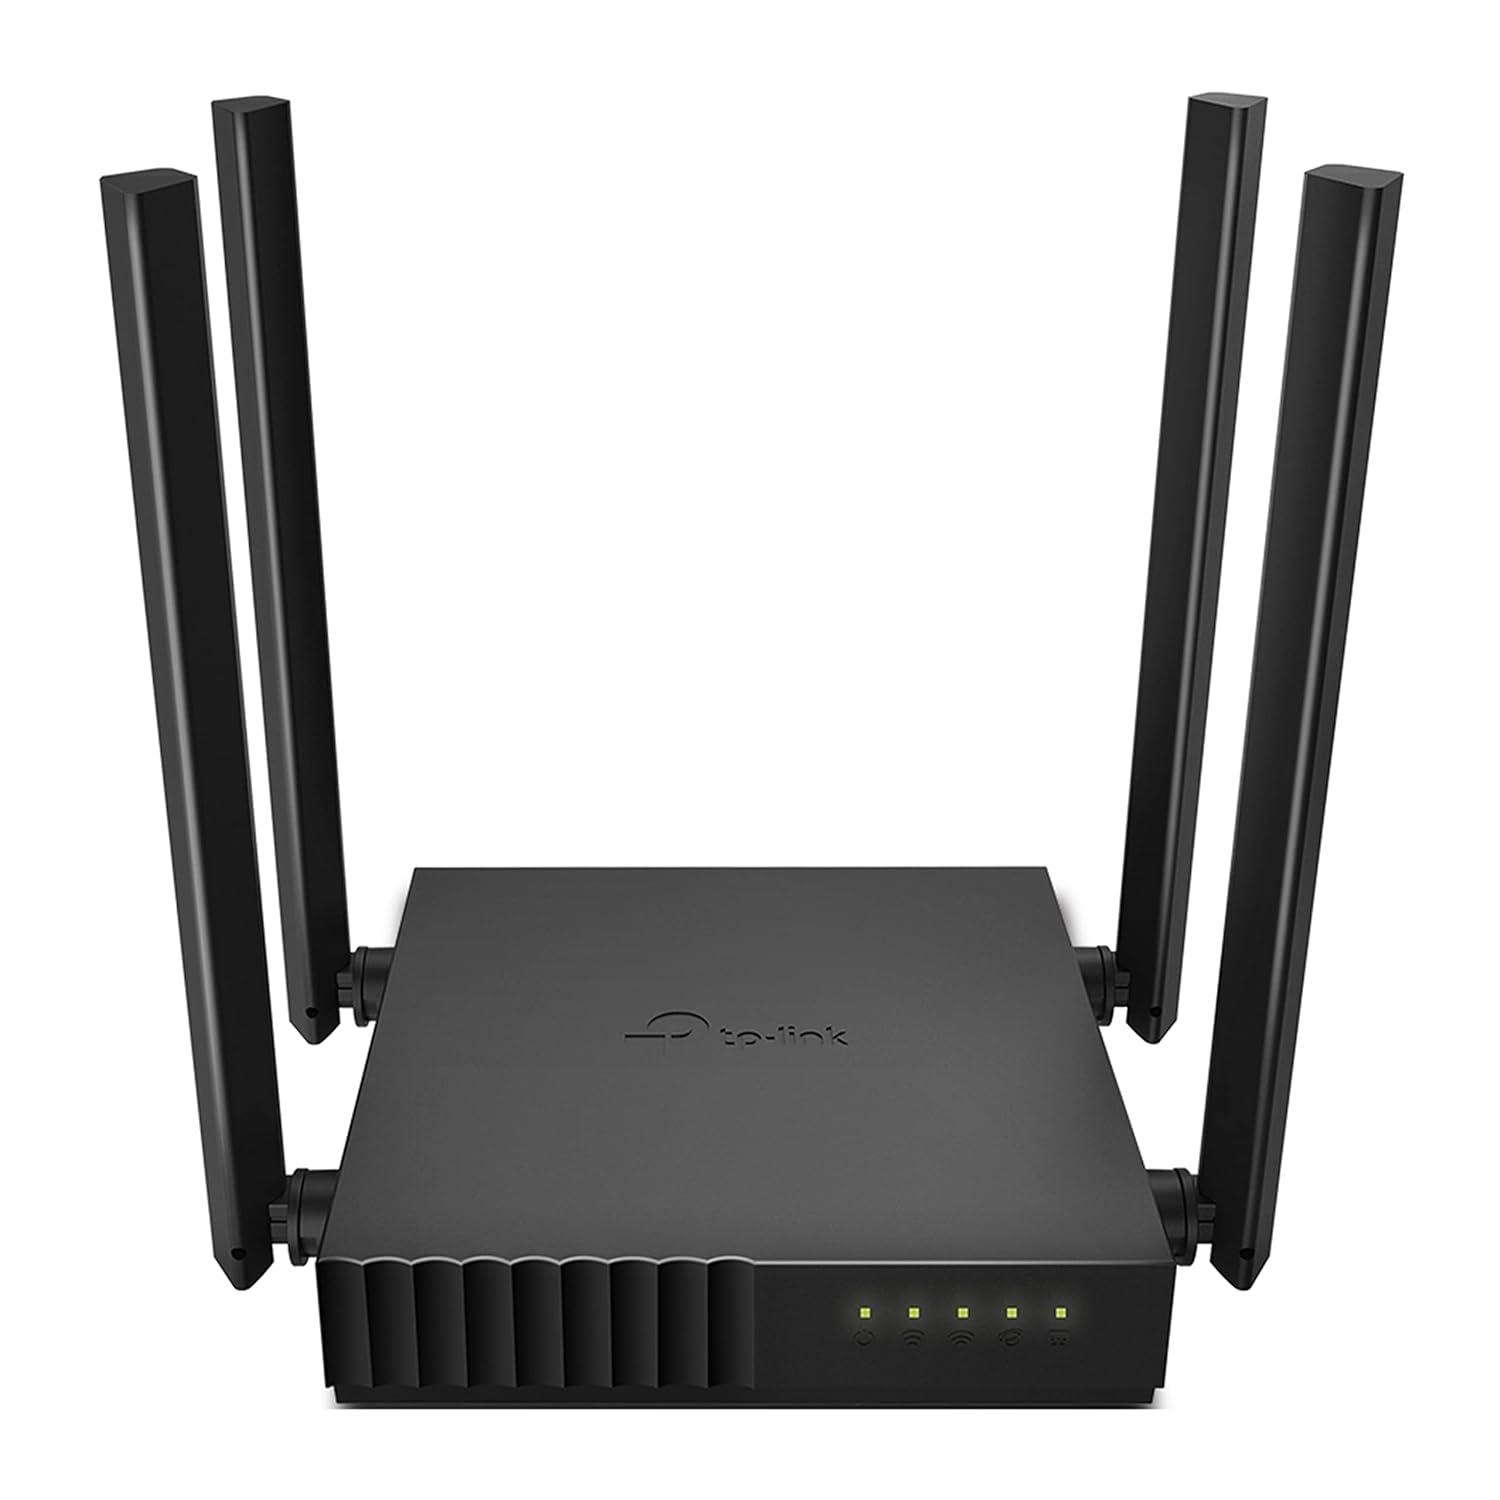 TP-Link Archer C54 AC1200 Dual Band Wi-Fi Router | 1200 Mbps Wireless Speed 4 Antennas | 2.4 GHz Guest Network